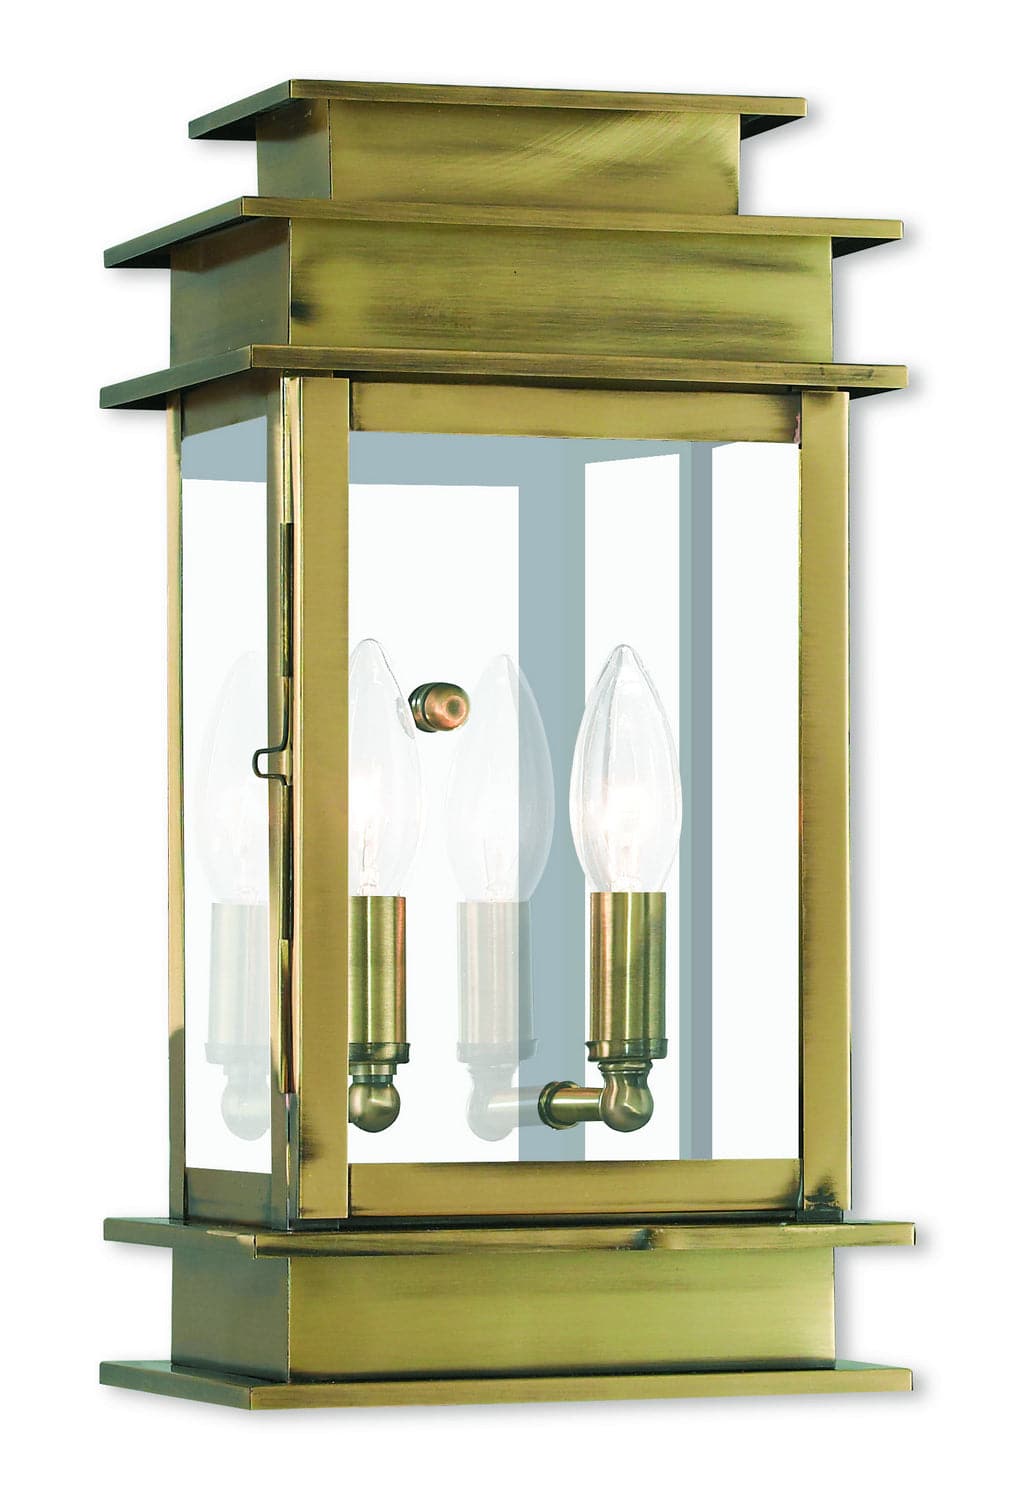 Livex Lighting - 2014-01 - Two Light Outdoor Wall Lantern - Princeton - Antique Brass w/ Polished Chrome Stainless Steel